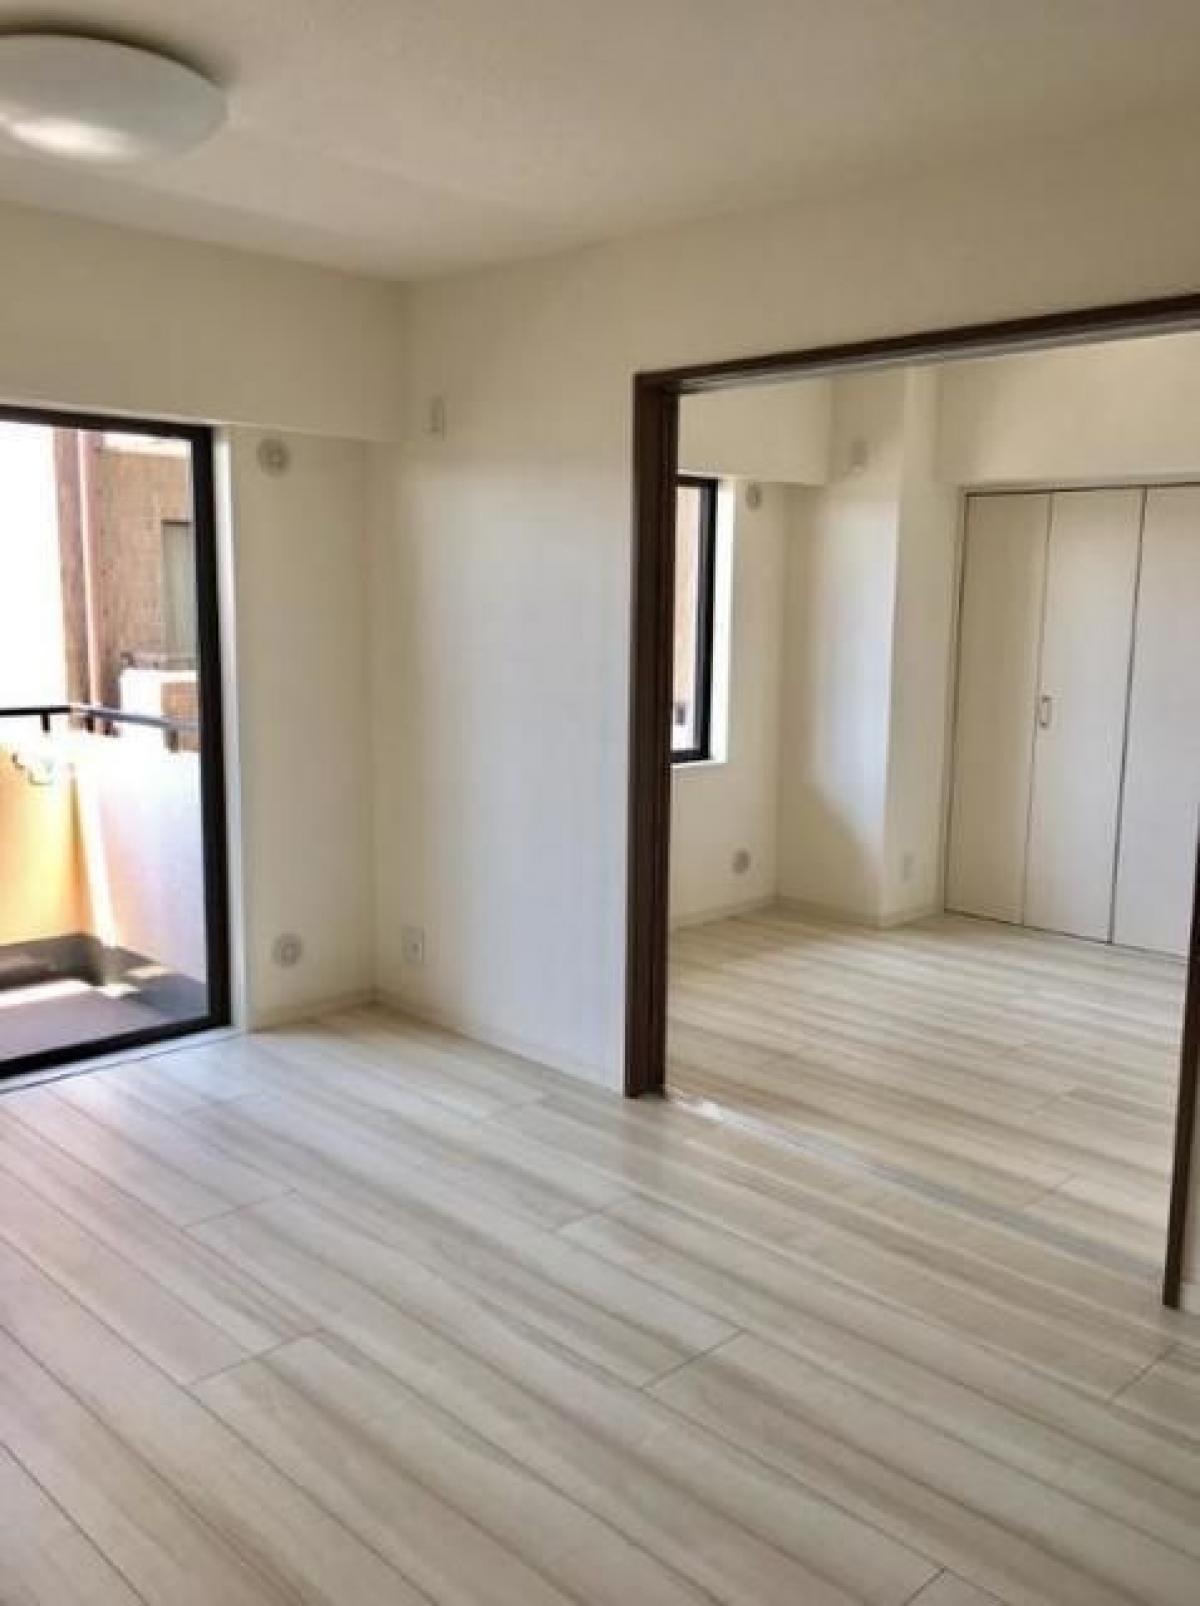 Picture of Apartment For Sale in Adachi Ku, Tokyo, Japan